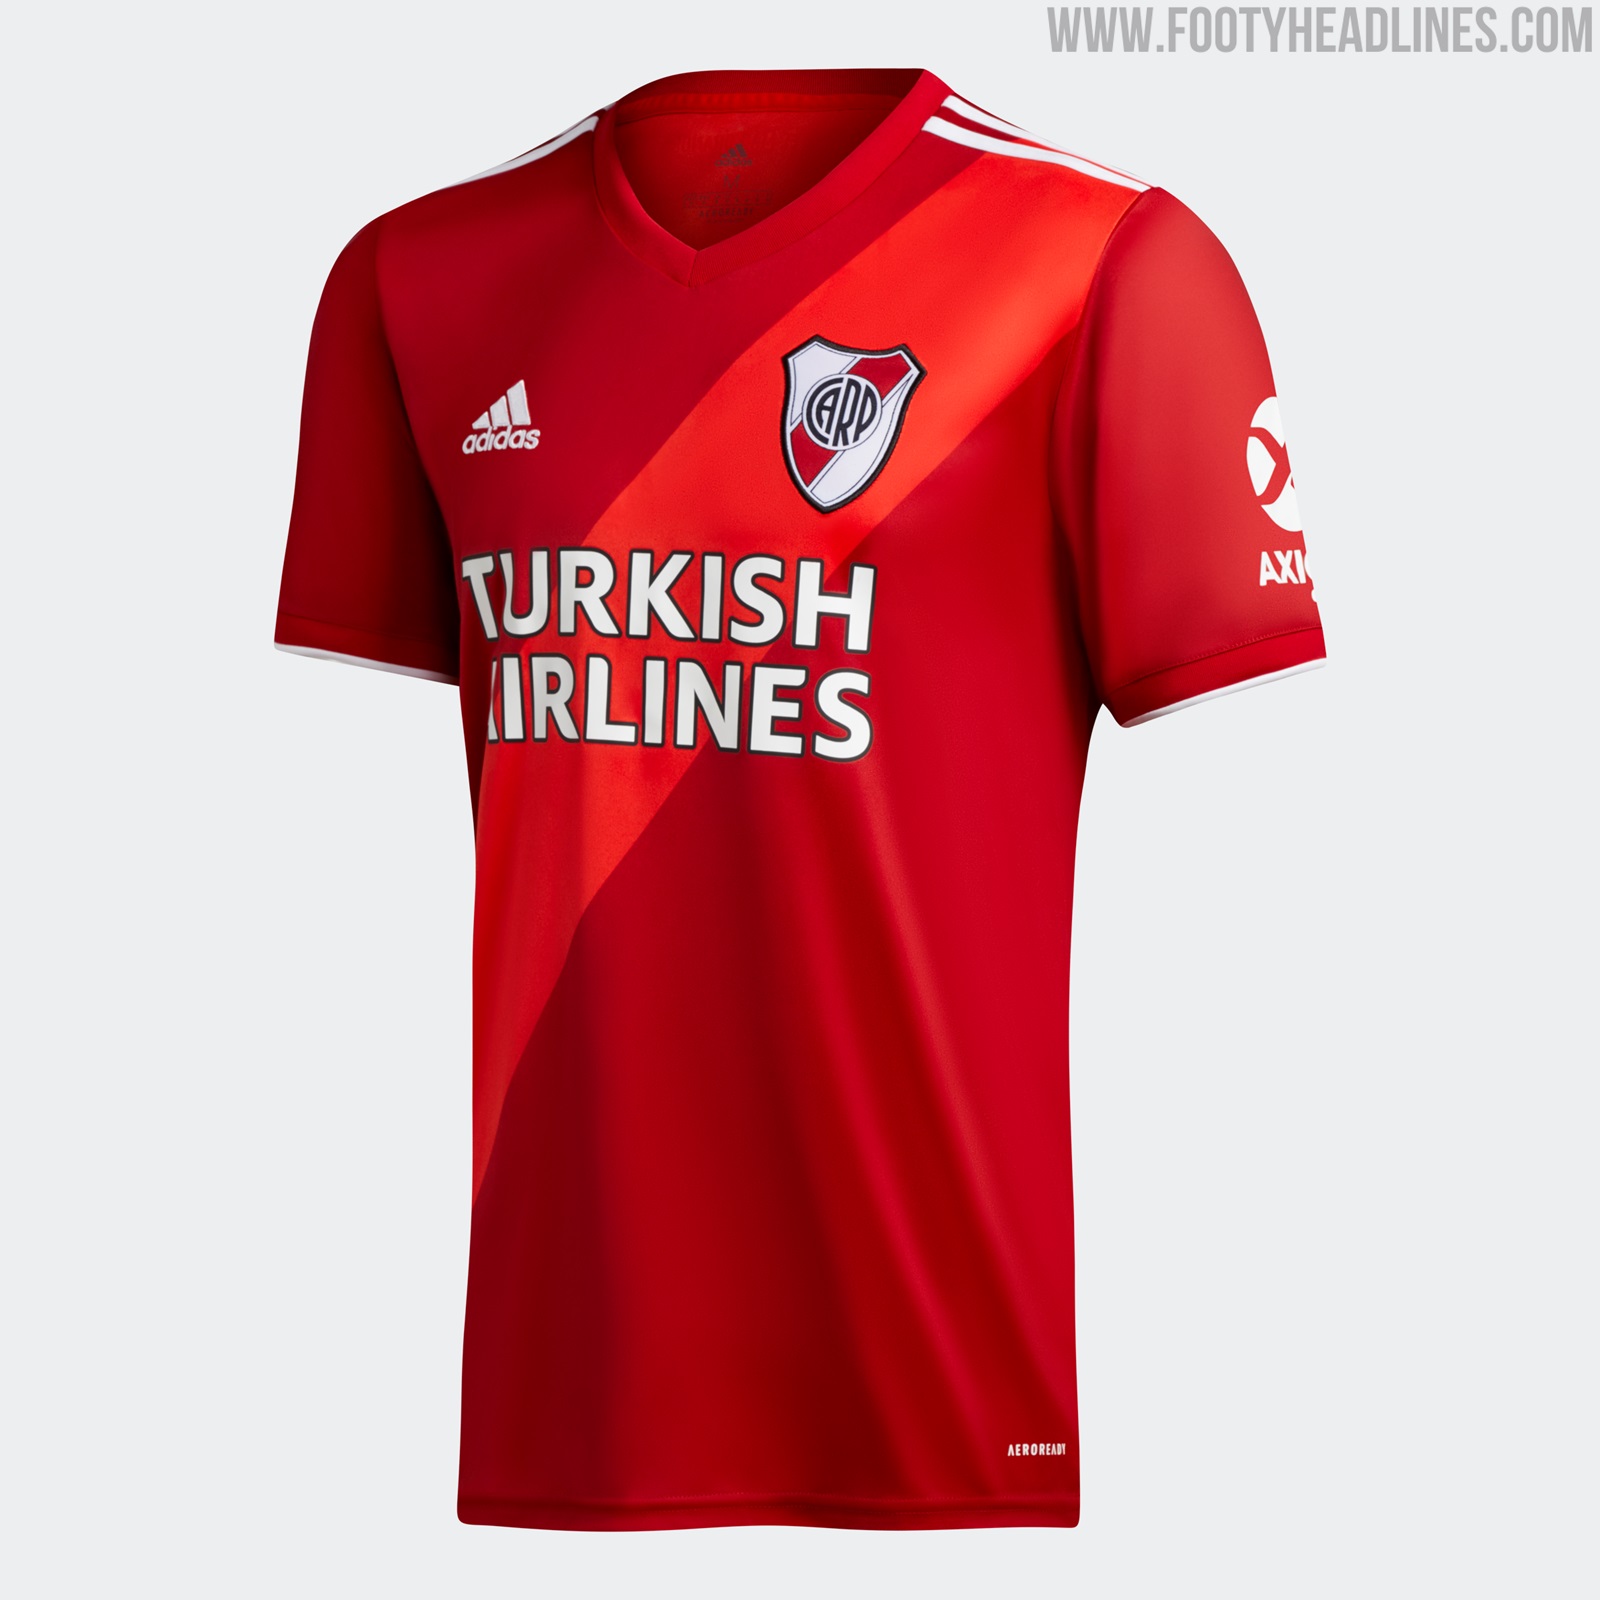 River Plate 20-21 Away Kit Released - Stylish Classic Adidas